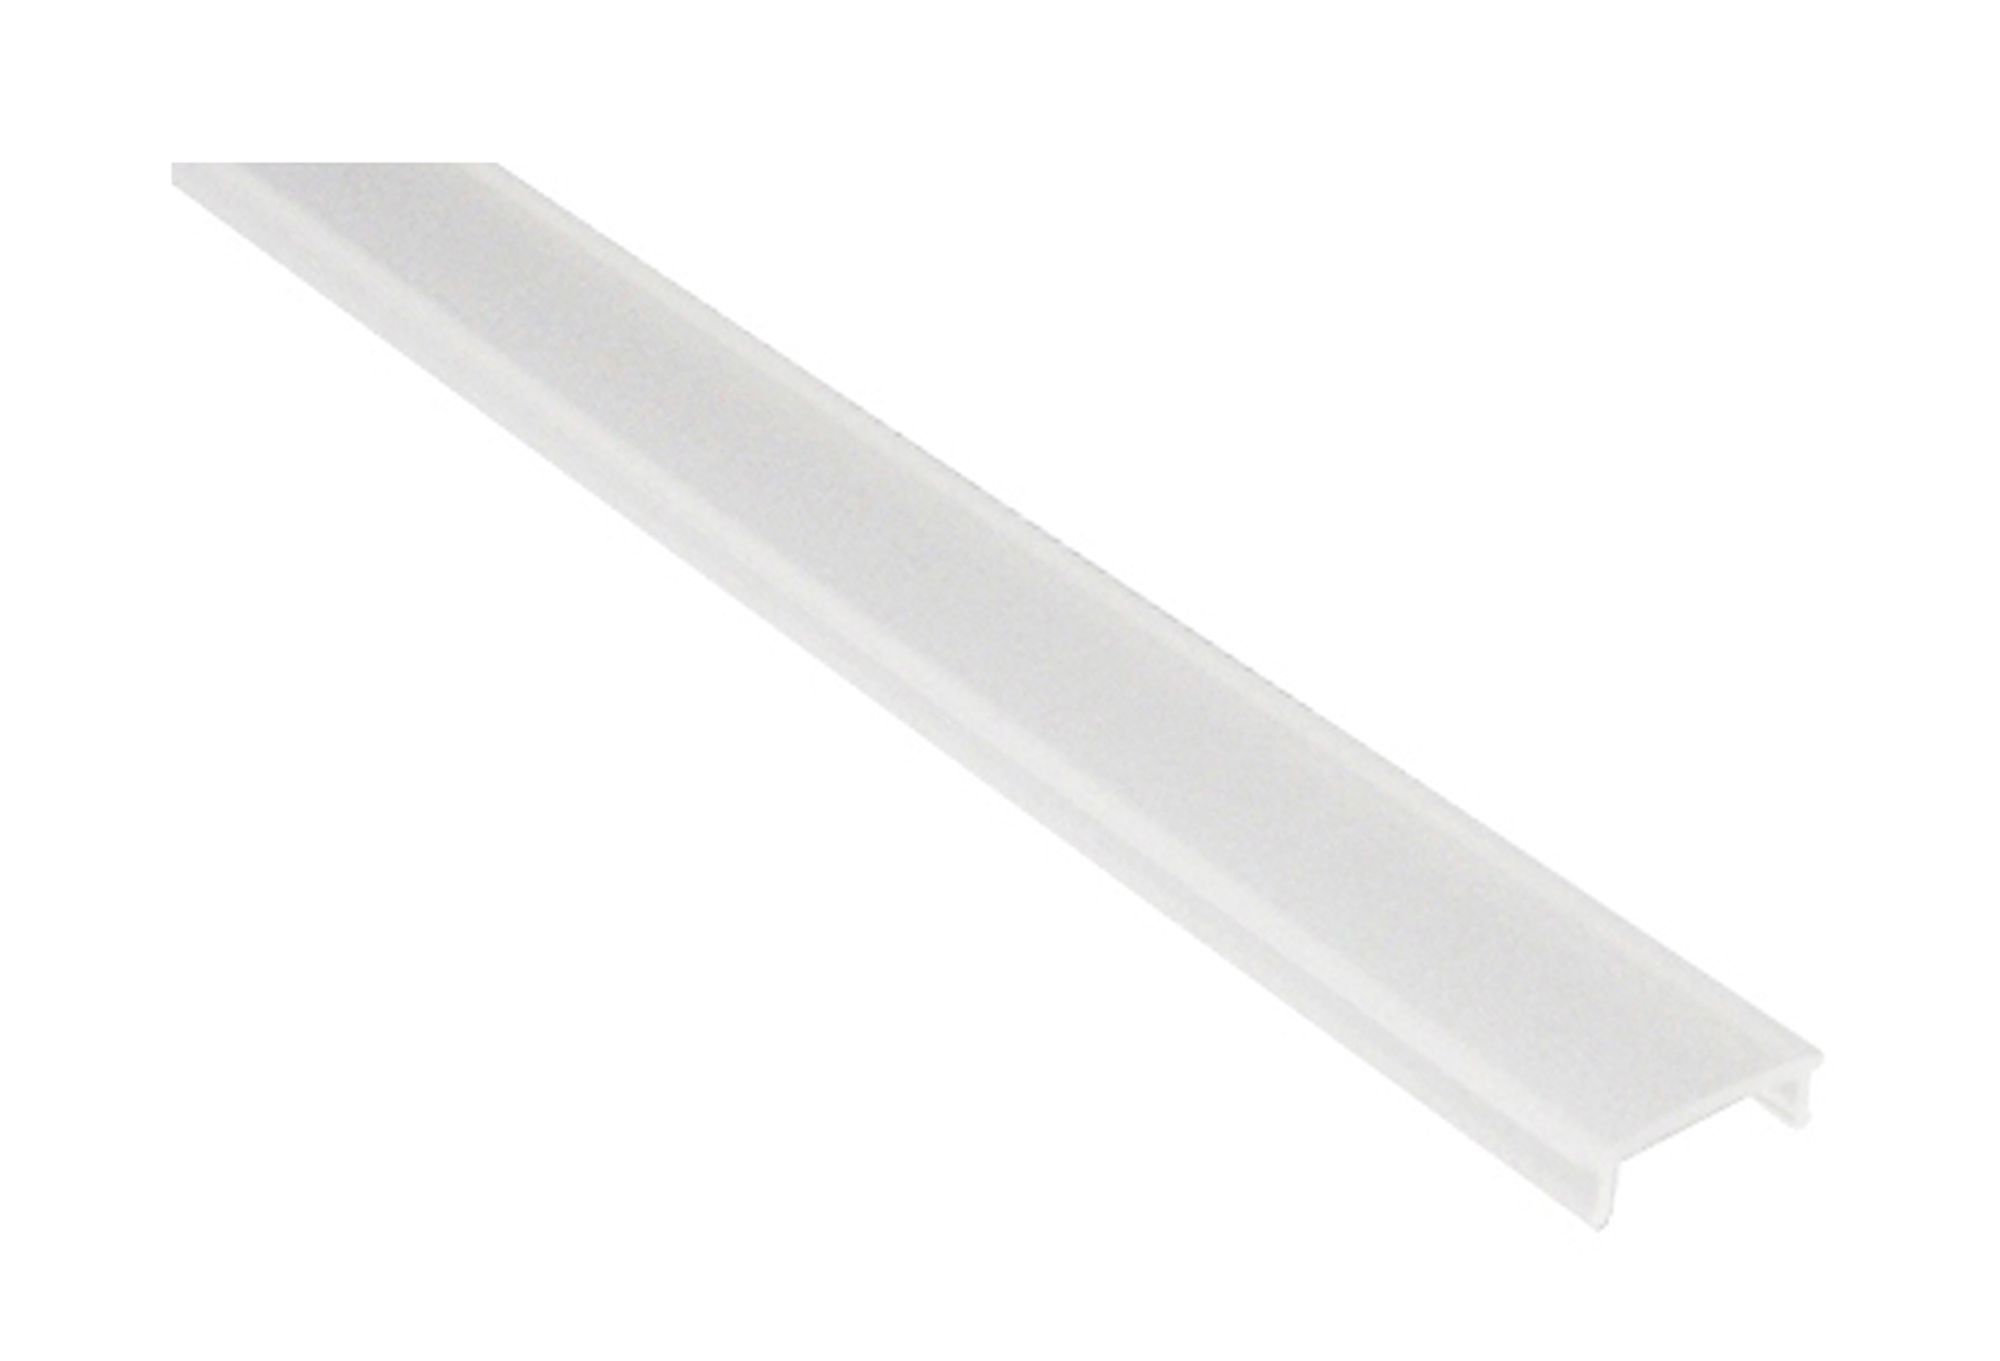 DA910044  Lin 4918W; 2m Flat Frosted Diffuser Cover For DA900033 15mm Wide 85% Transmittance